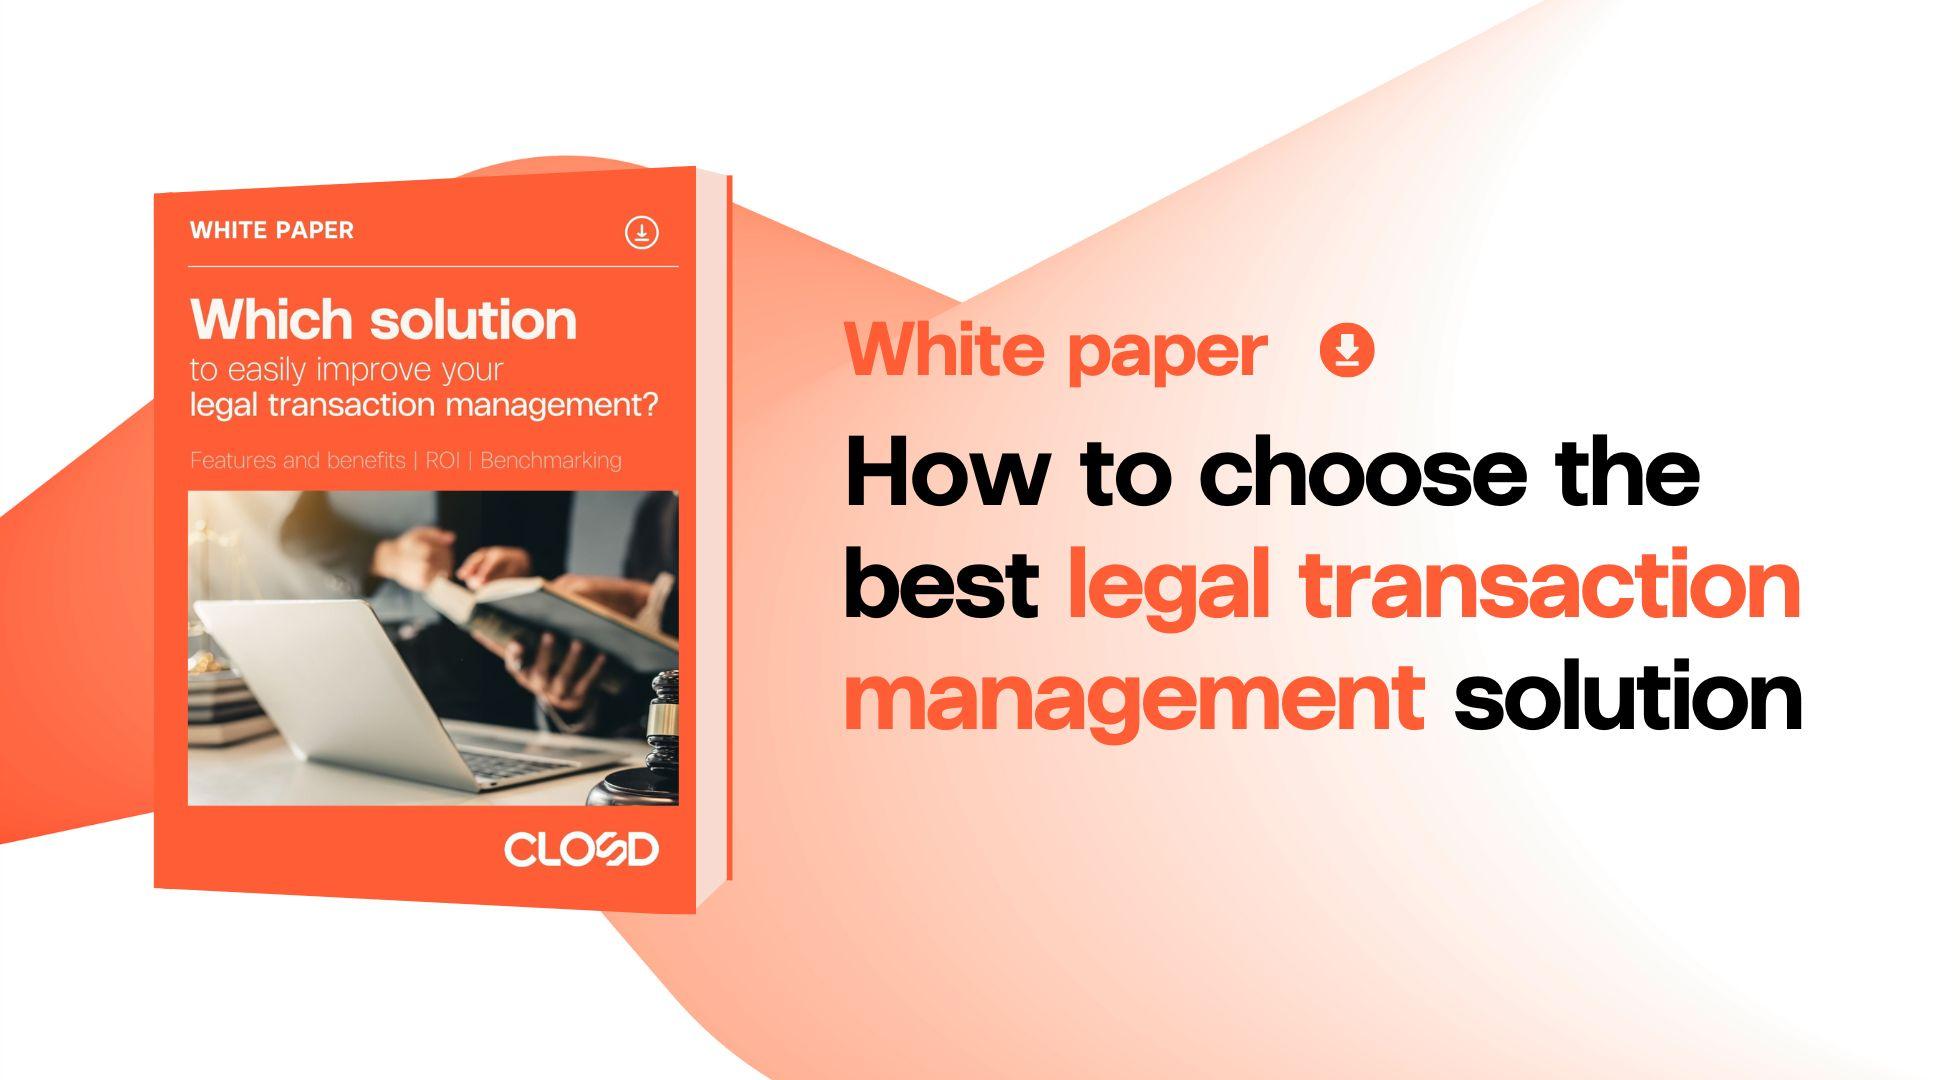 white paper how to choose legal transaction management solition